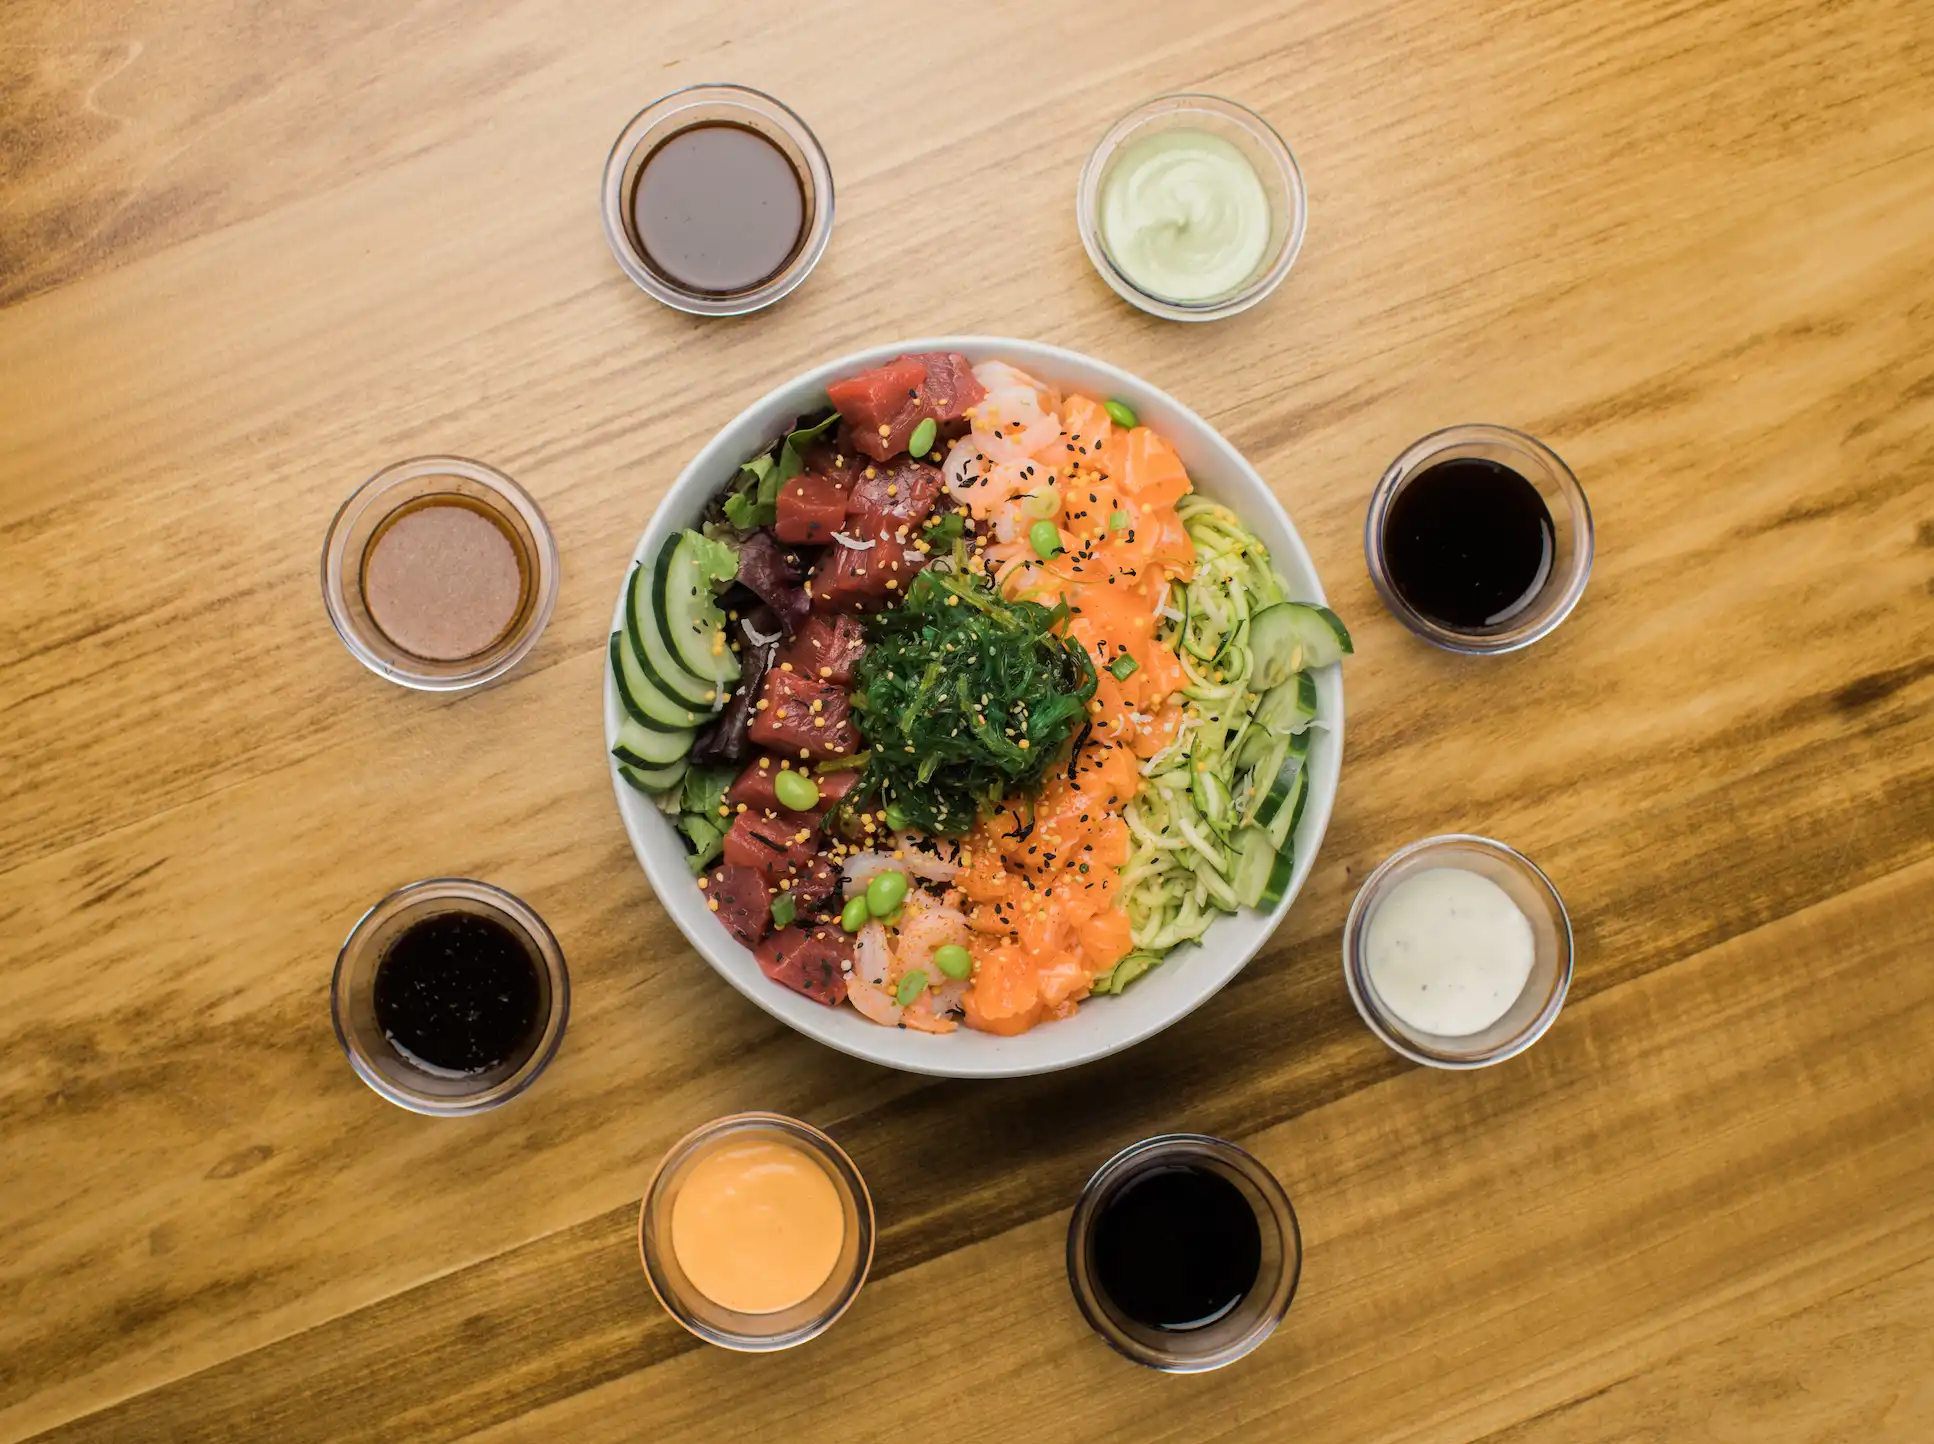 Poke bowl and house made sauces